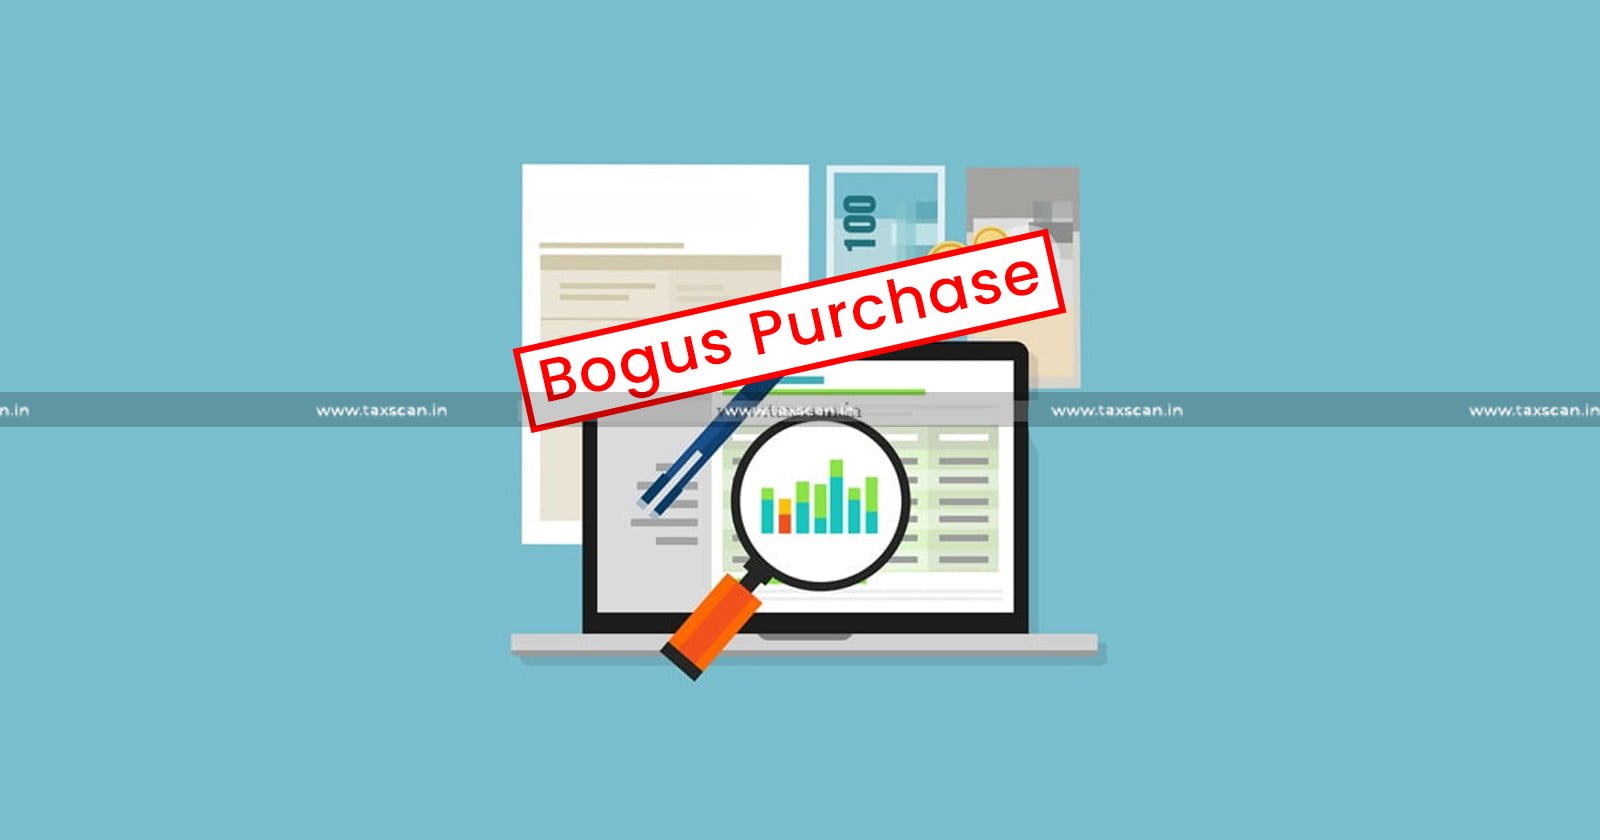 Gross Profit -Gross Profit Rate of 5% against 0.69%- Addition of Bogus Purchase - Addition of Bogus Purchase is too High - Bombay High Court